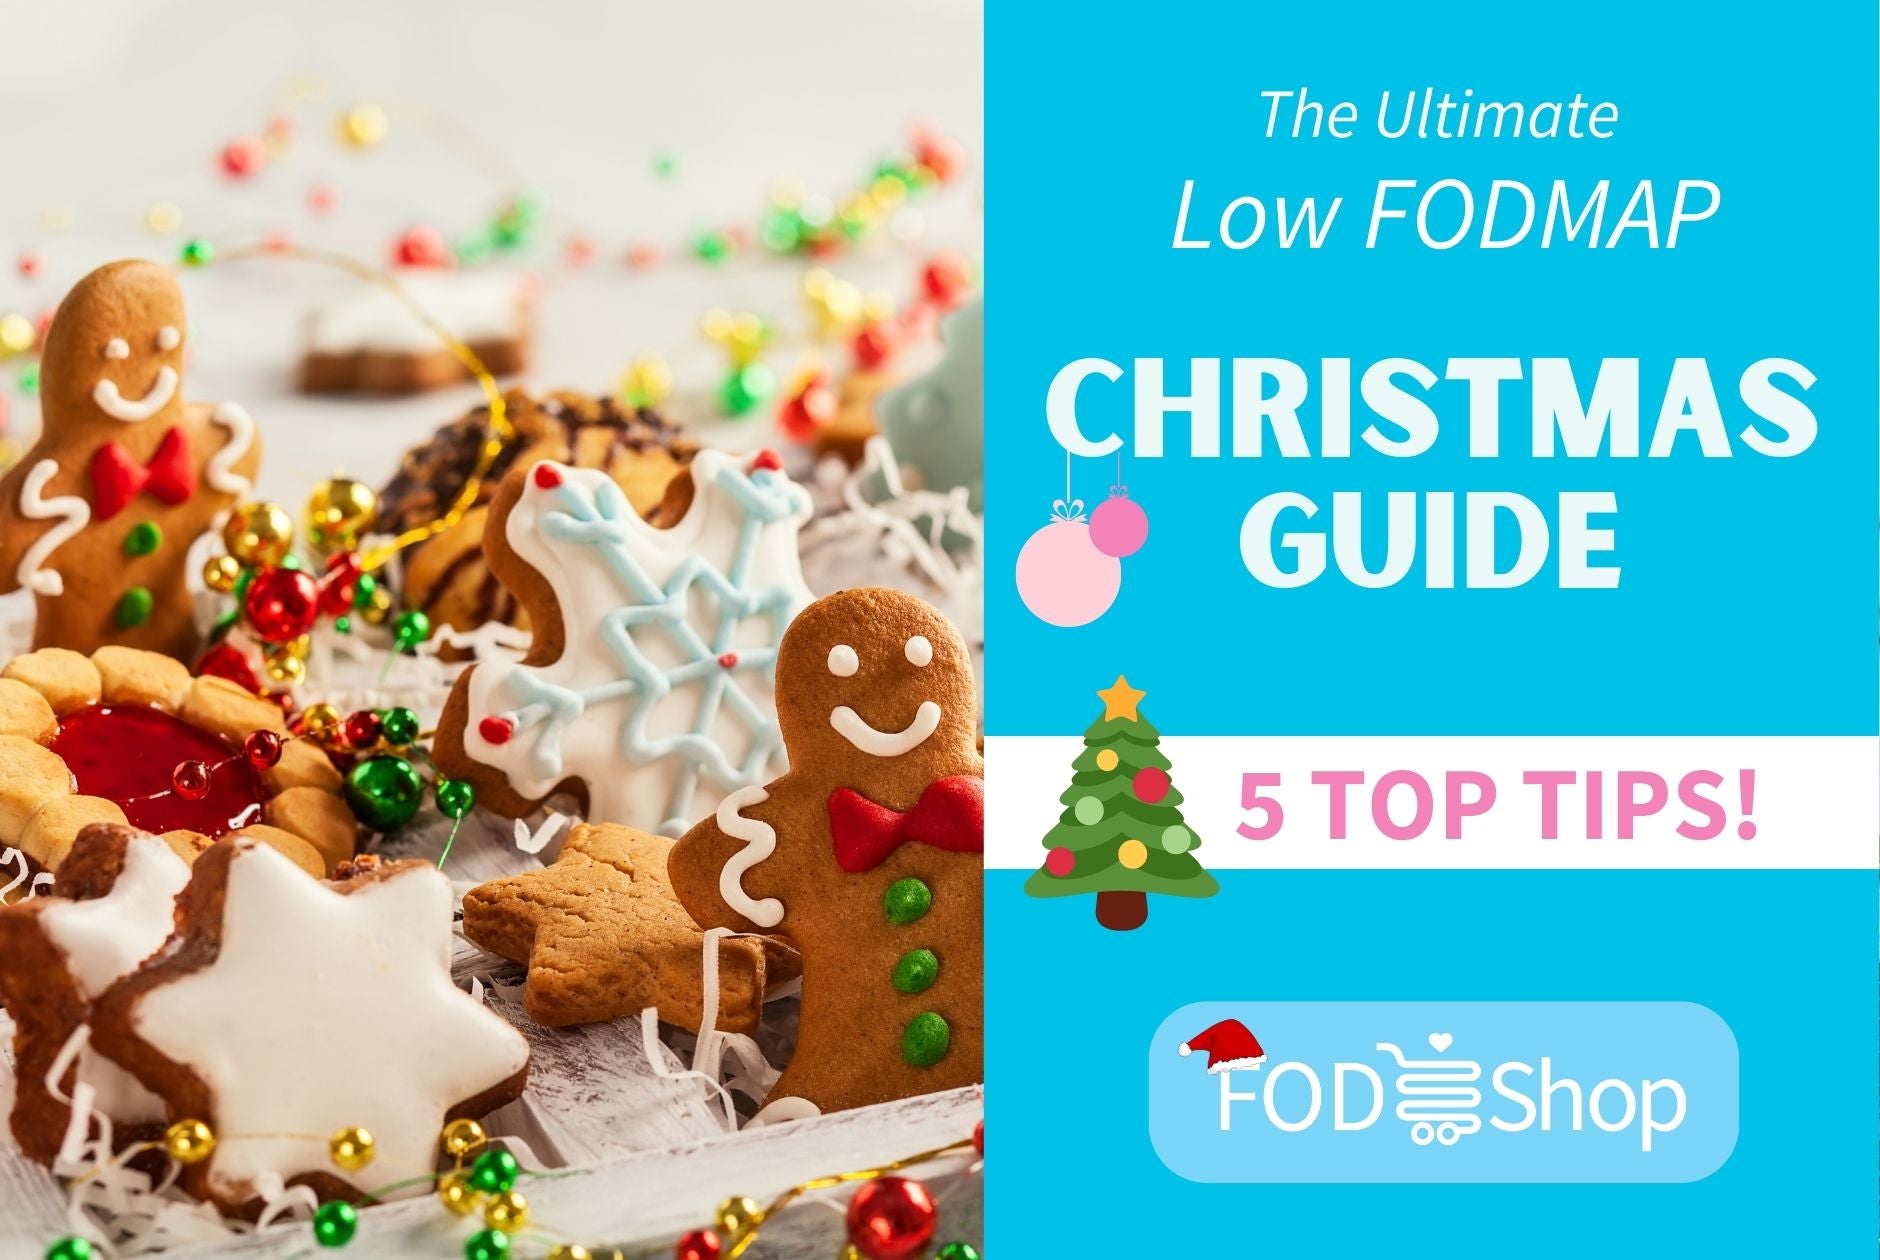 The Ultimate Low FODMAP Christmas Survival Guide!